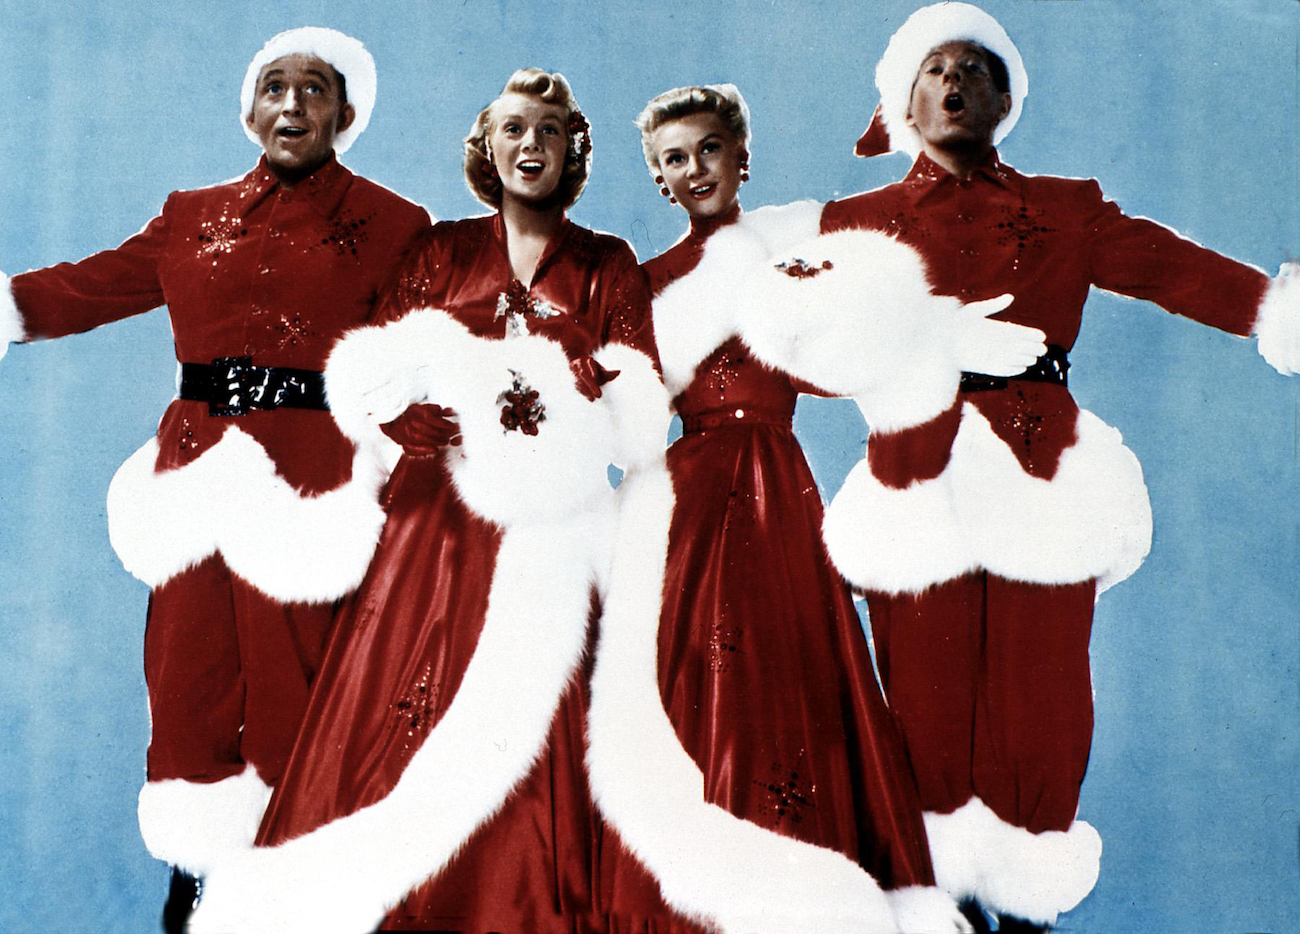 The cast of 'White Christmas' in 1954.